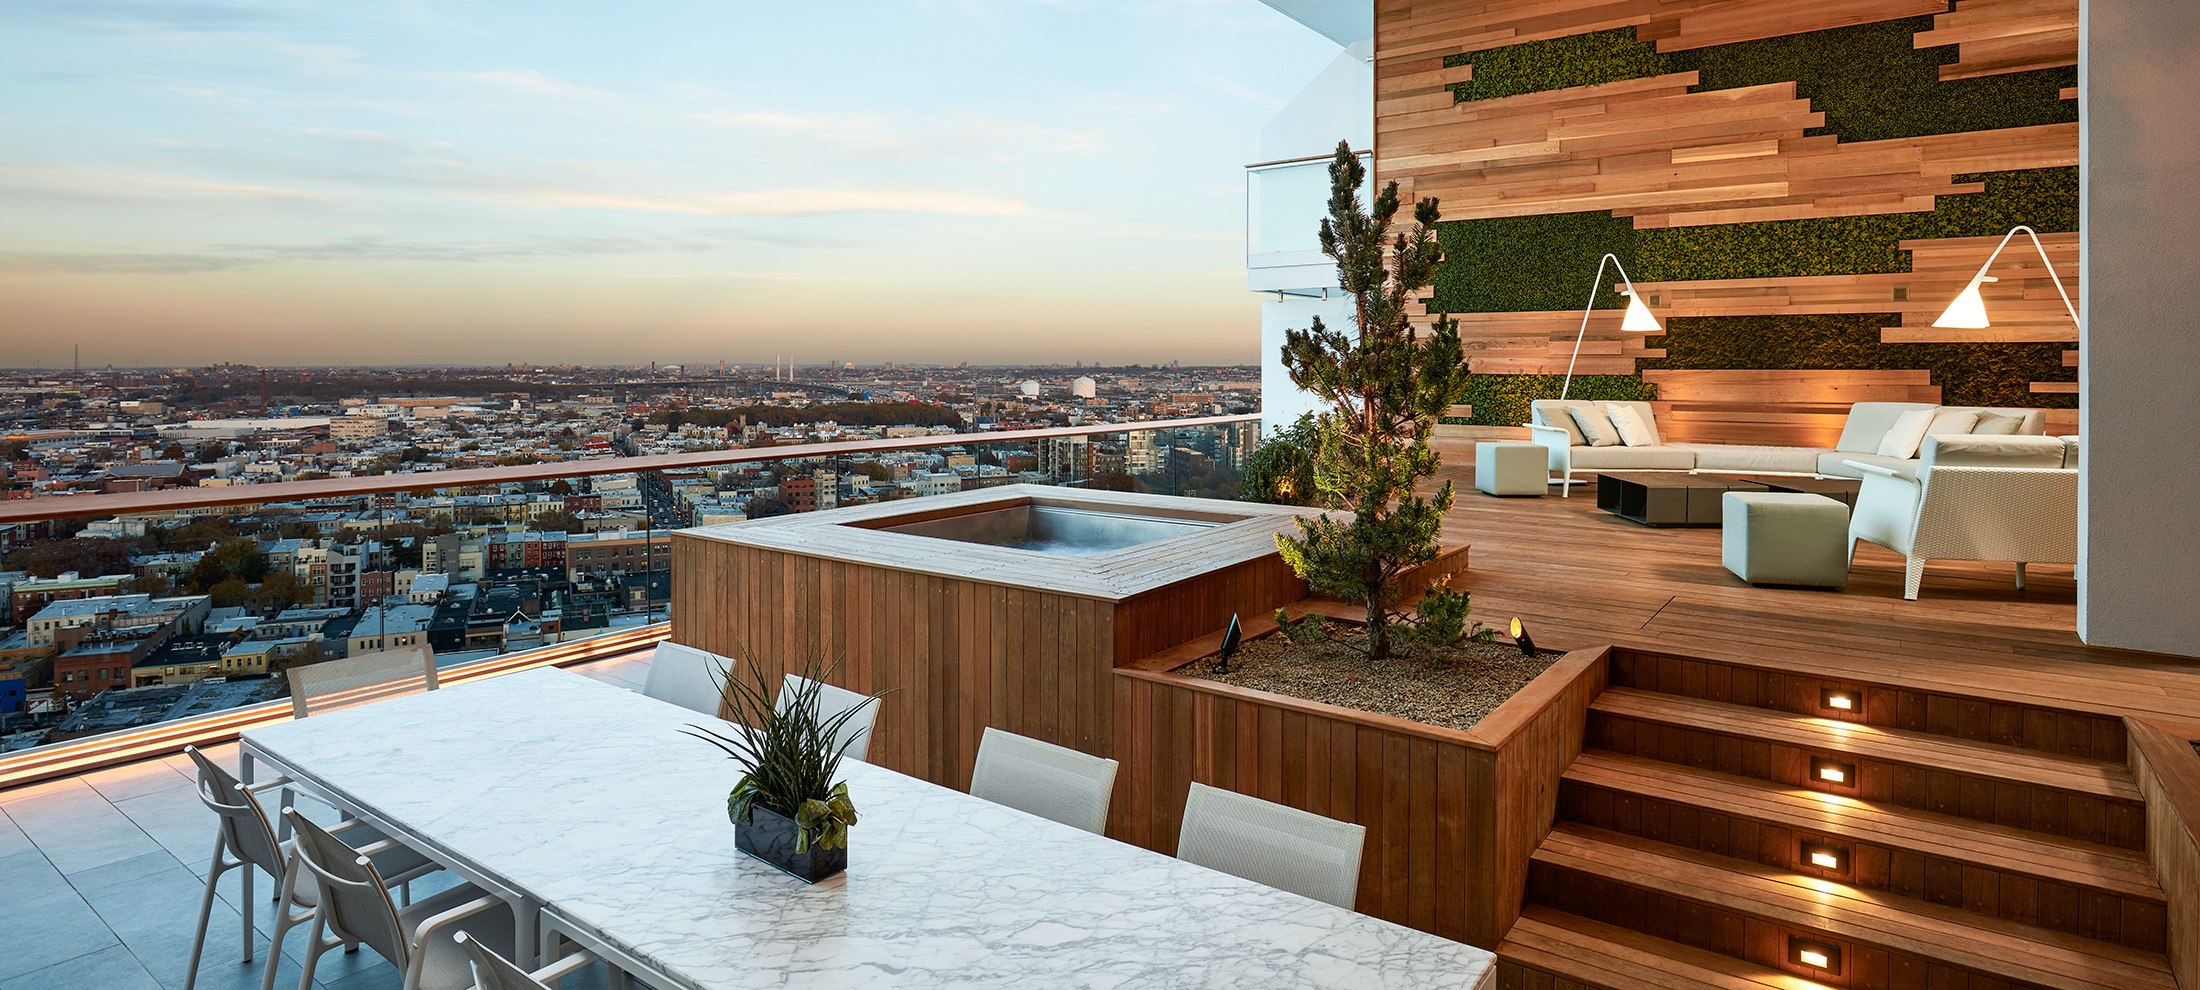 5 BOUTIQUE HOTELS IN BROOKLYN